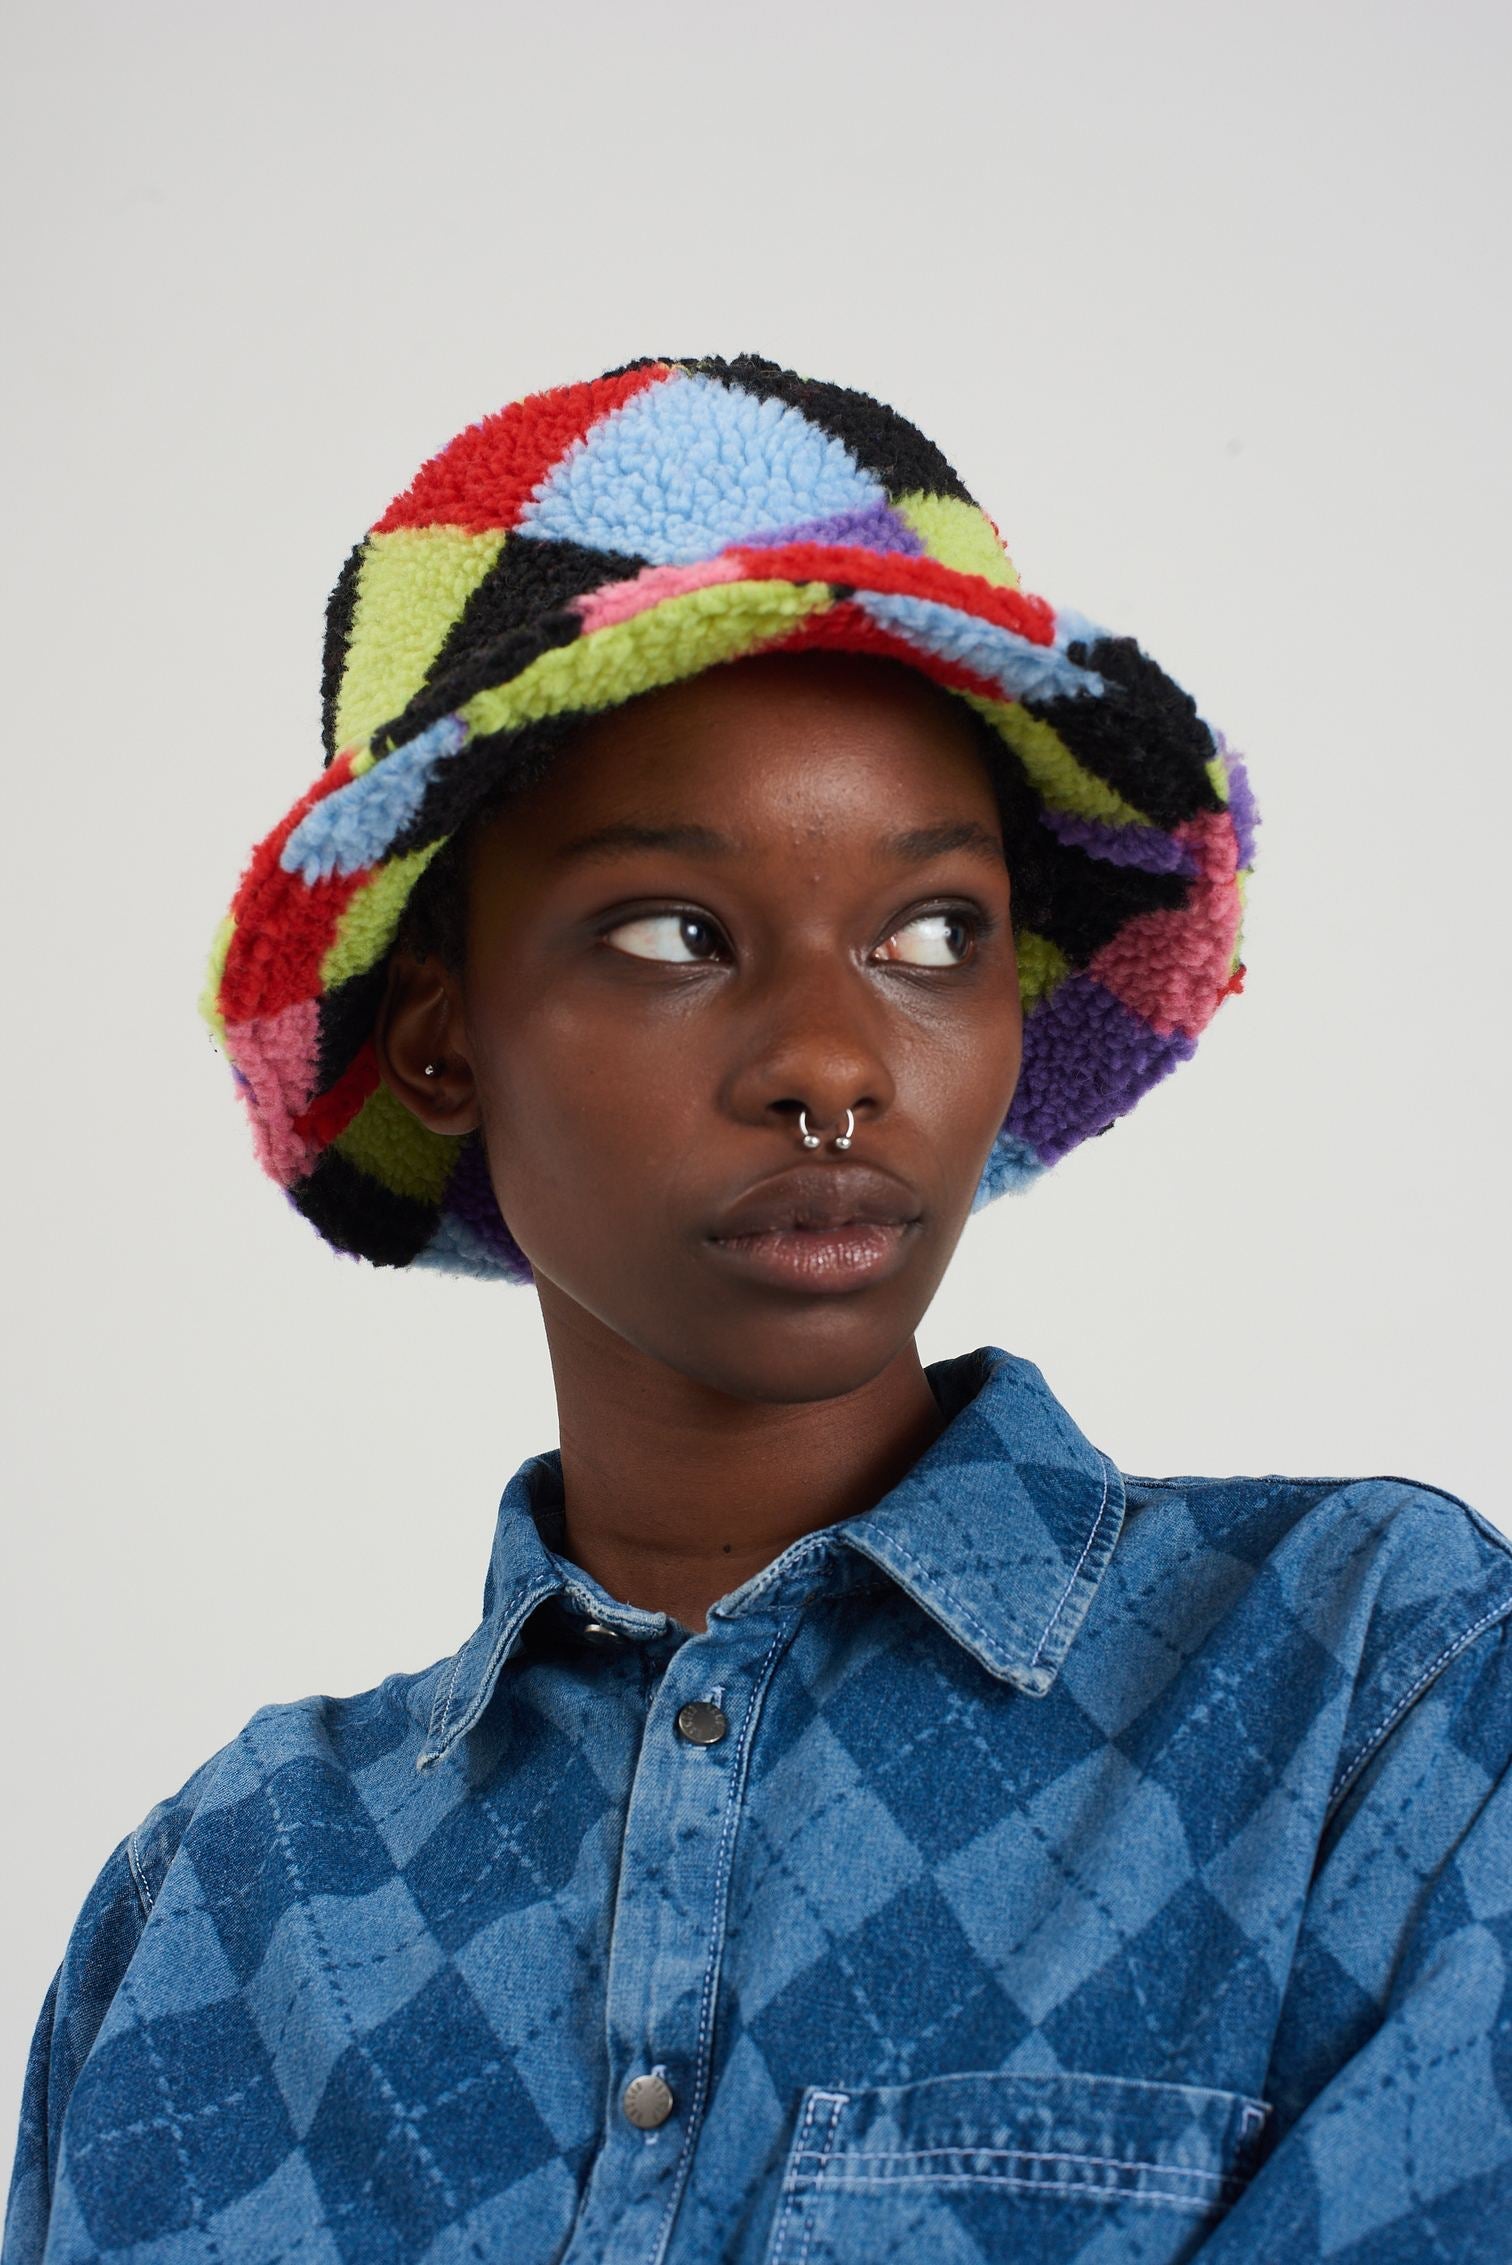 VIVID BUCKET HAT - EXCLUSIVE Bucket Hats from THE RAGGED PRIEST - Just $36! SHOP NOW AT IAMINHATELOVE BOTH IN STORE FOR CYPRUS AND ONLINE WORLDWIDE